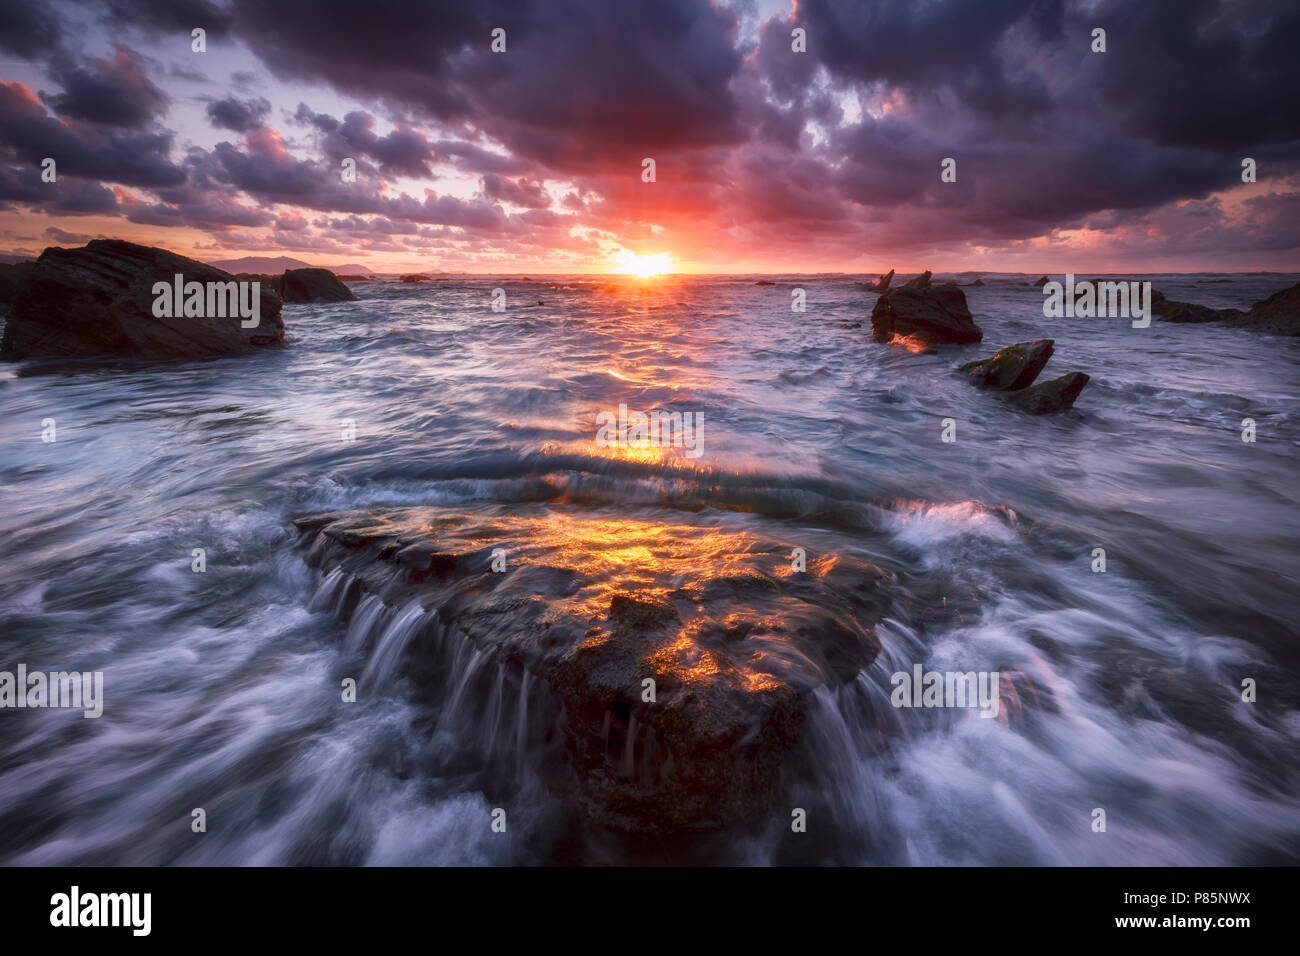 Sunset at Barrika beach, Games of Thrones Location Stock Photo